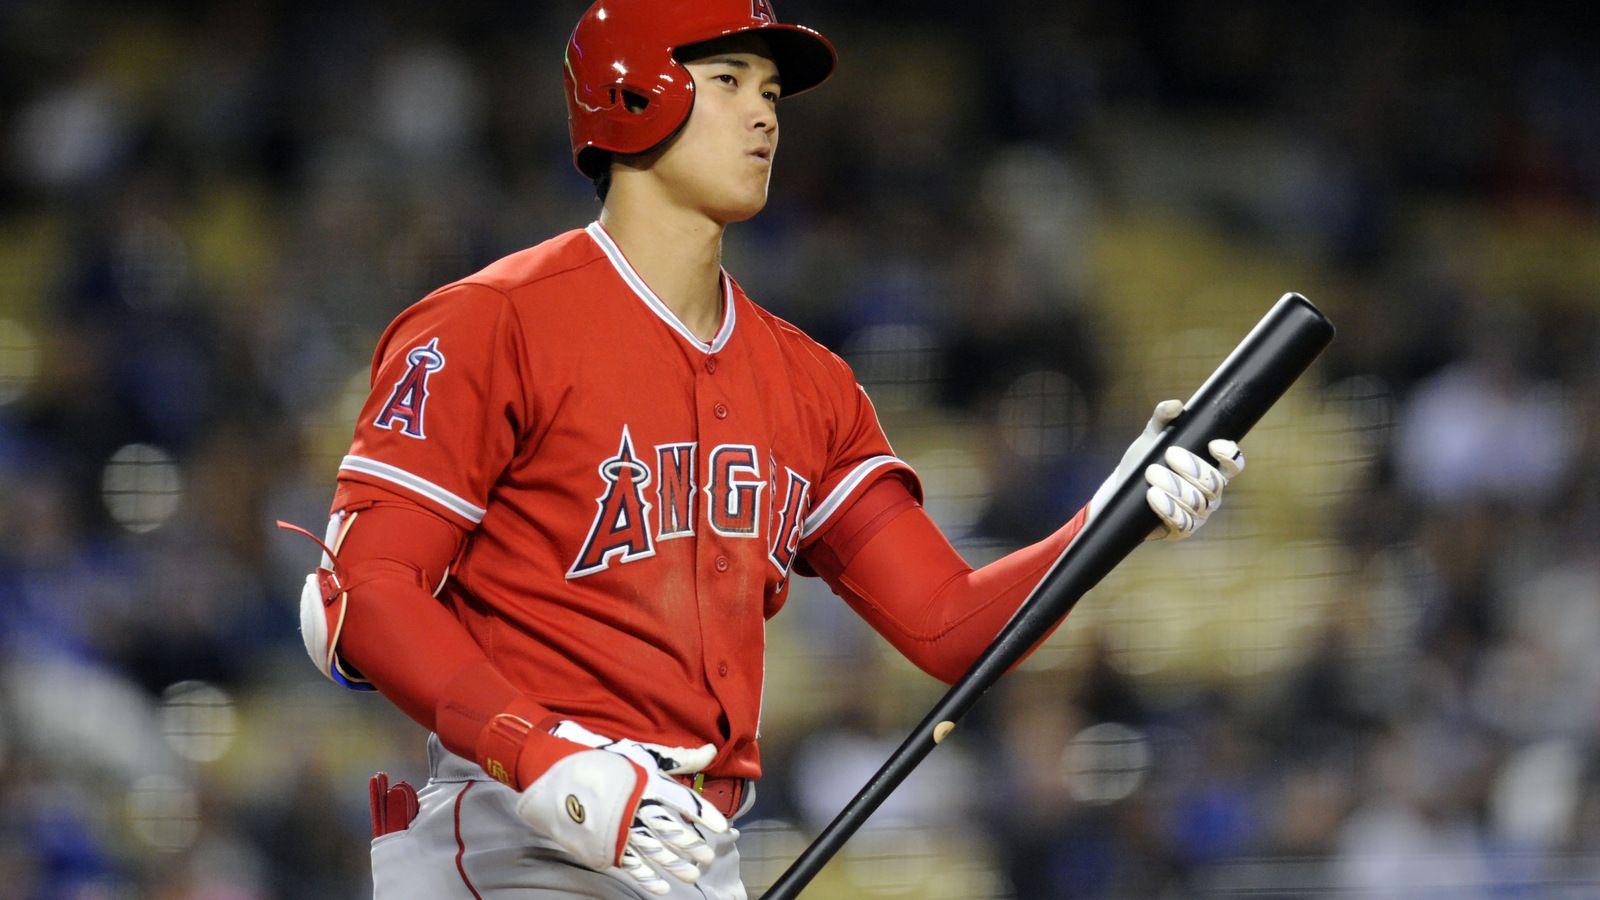 Watch: Shohei Ohtani gets silent treatment after first career home